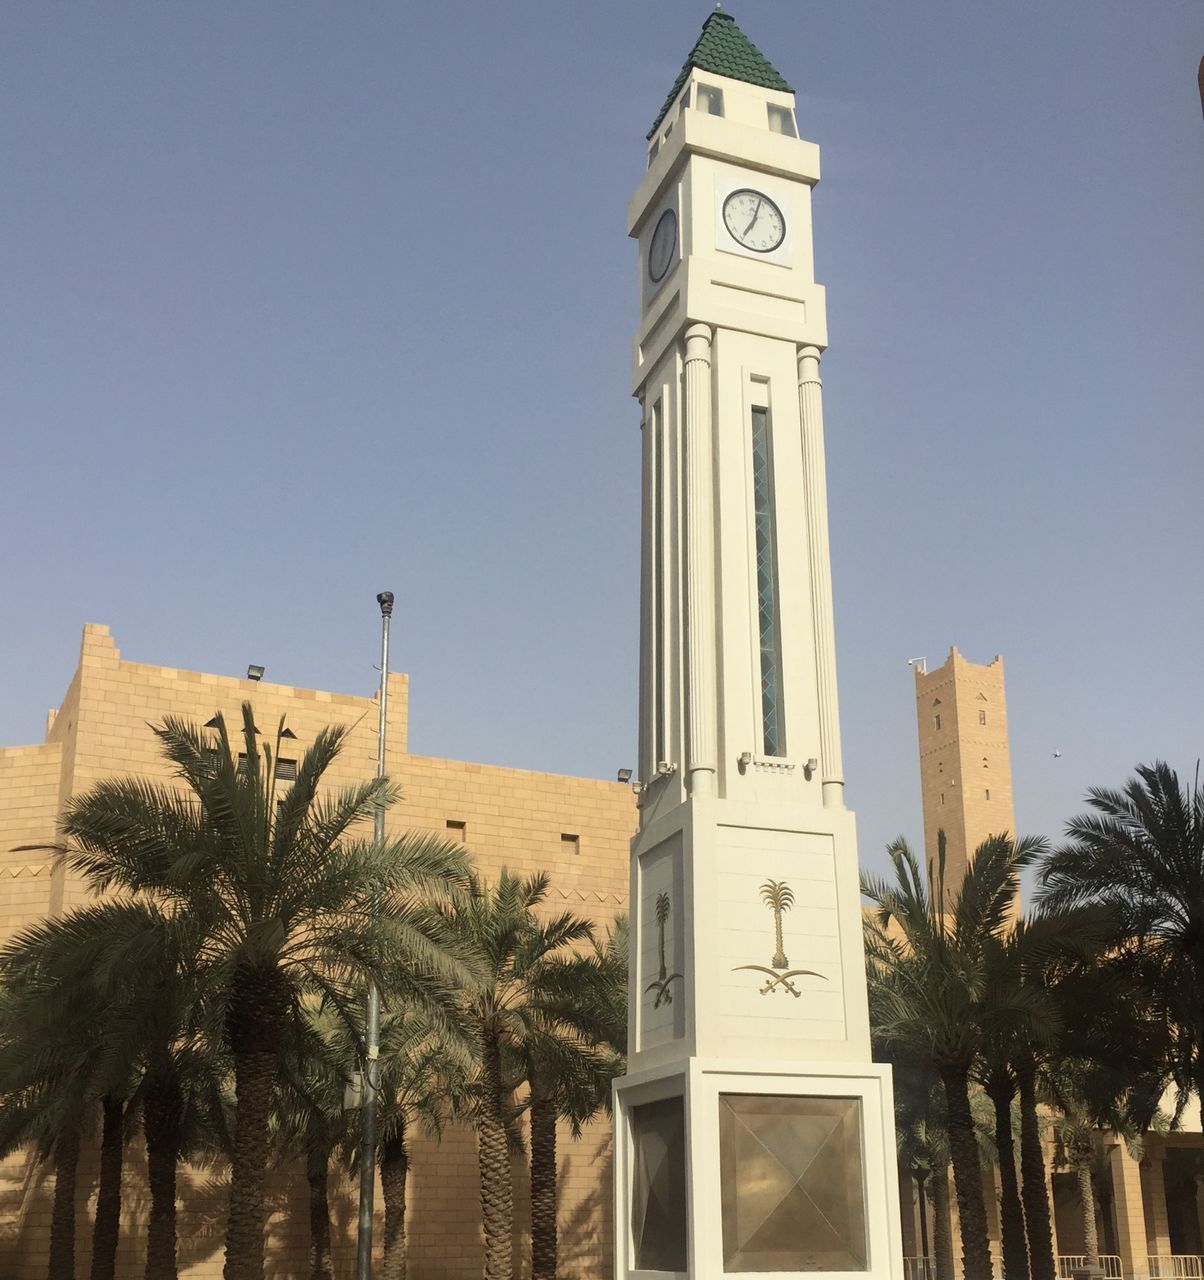 LOW ANGLE VIEW OF CLOCK TOWER AND PALM TREES AGAINST SKY